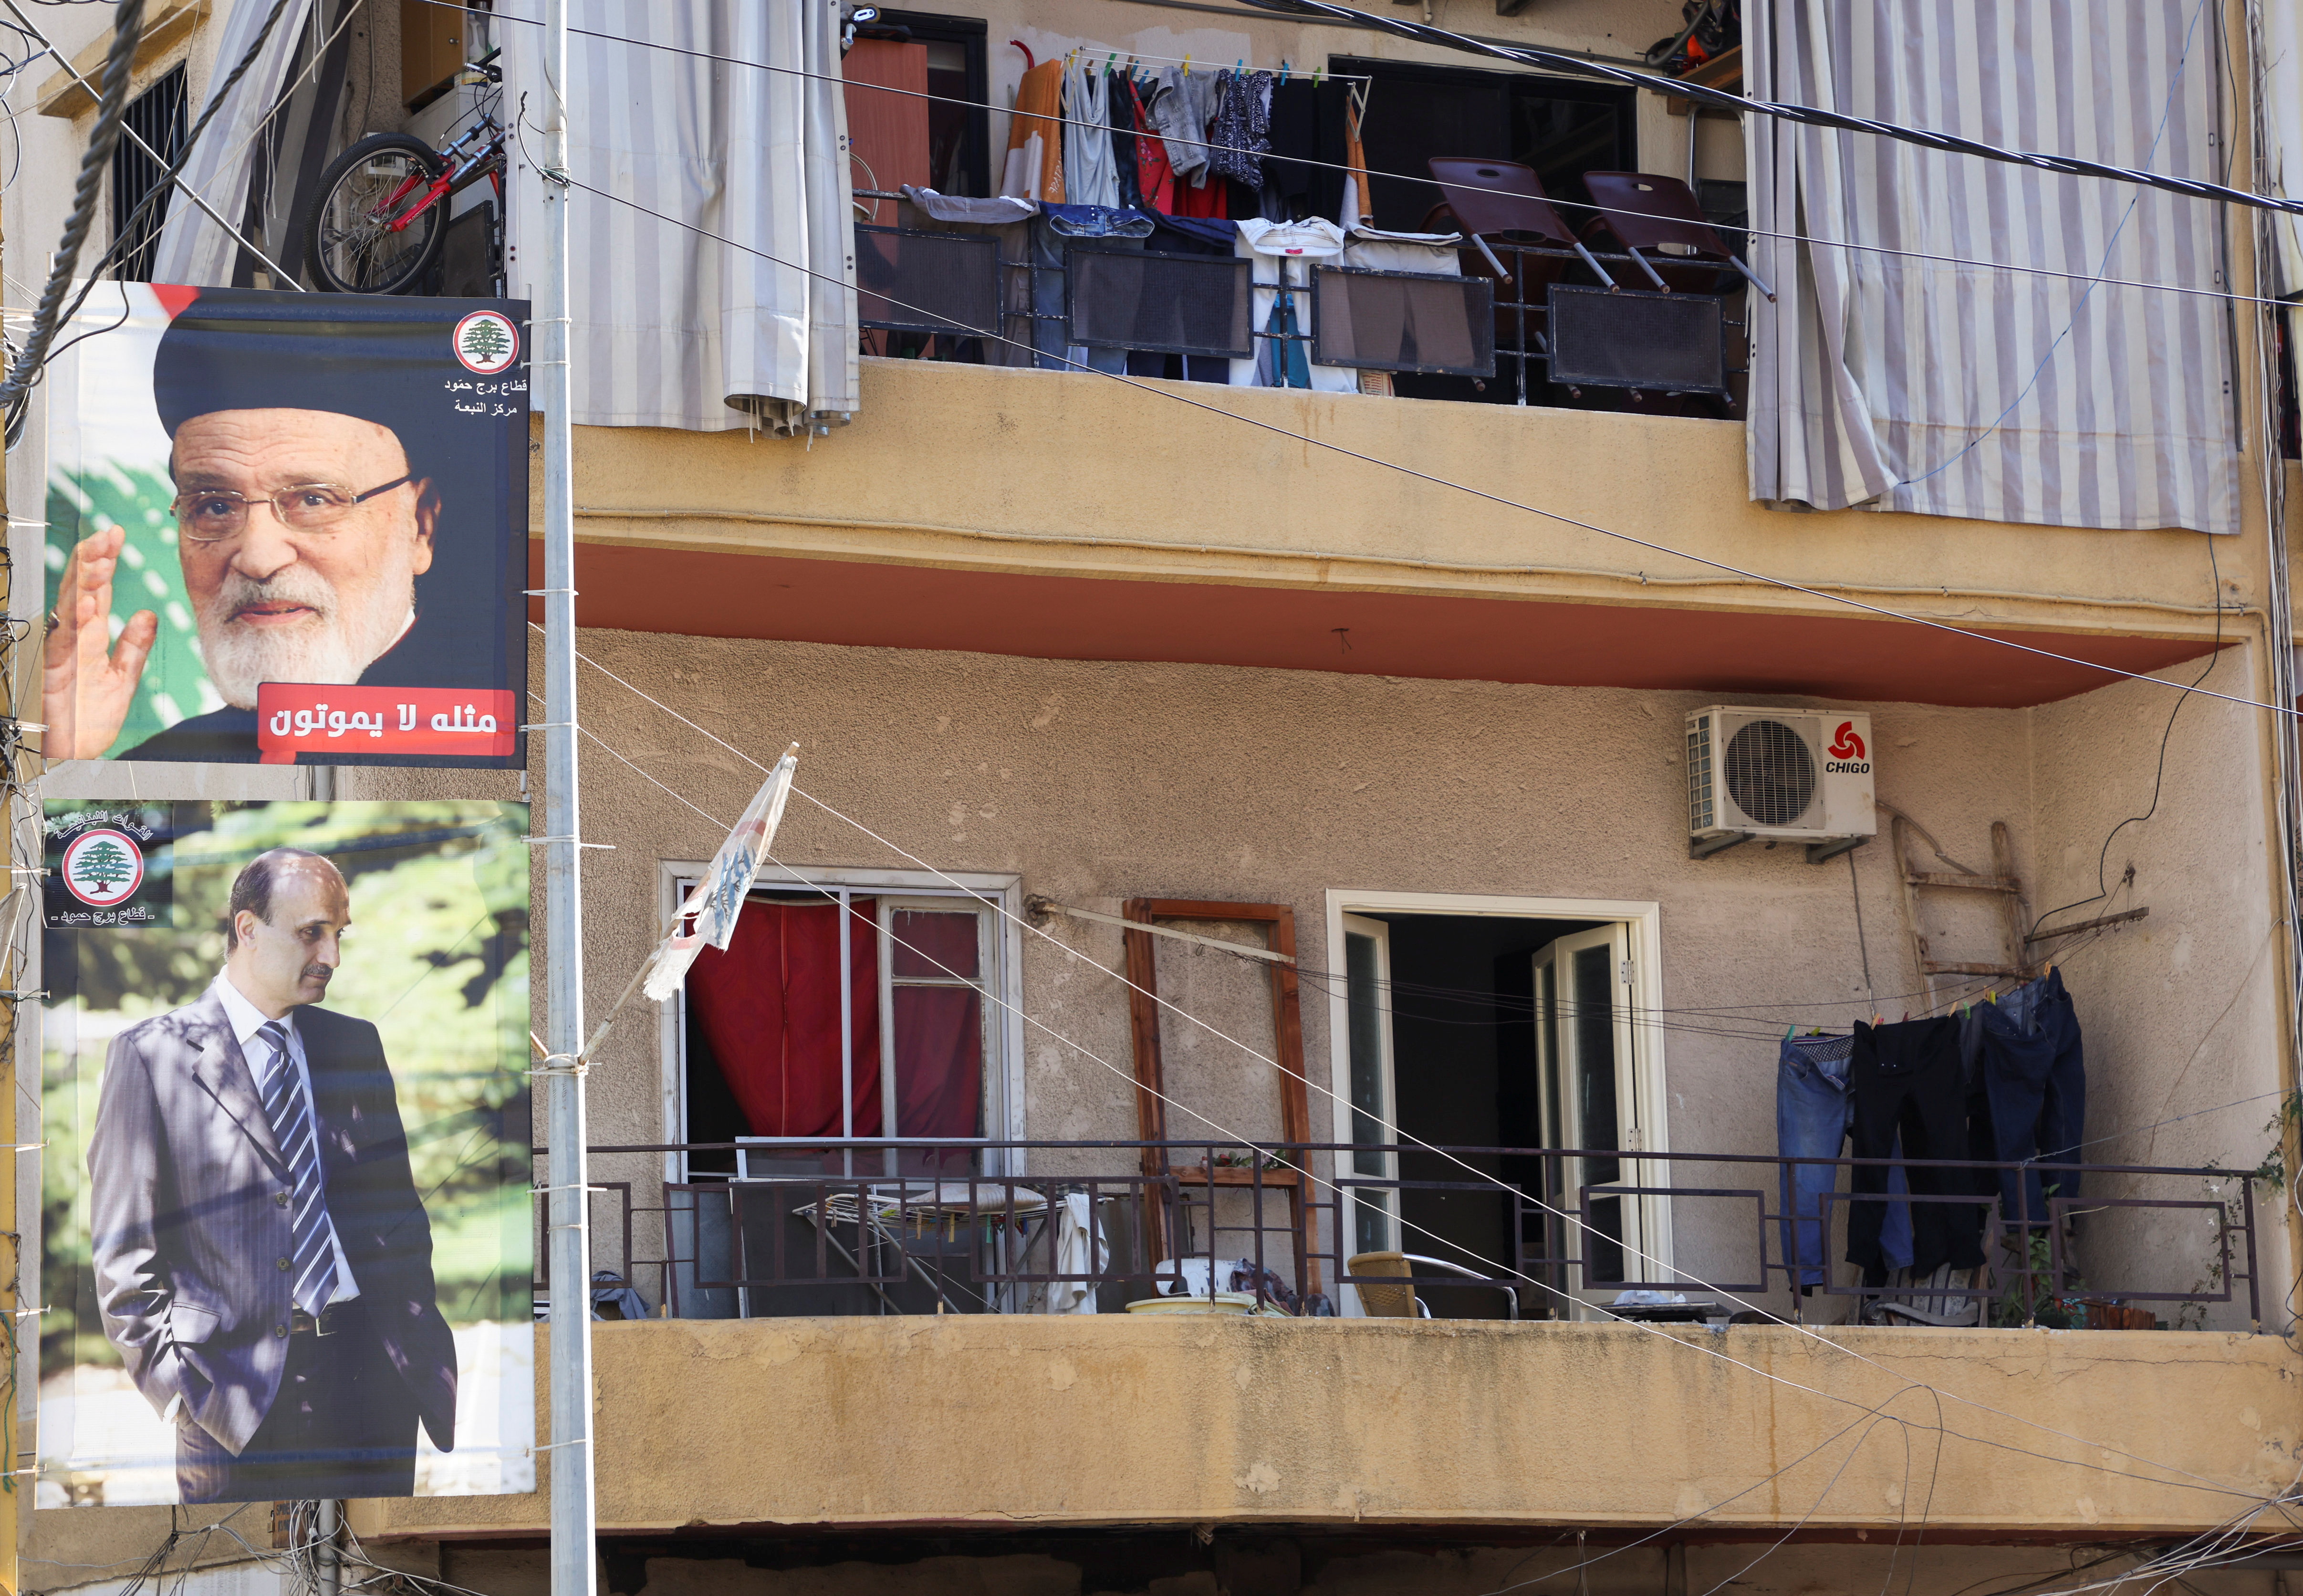 A poster depicting former Lebanon's Christian Maronite Patriarch Mar Nasrallah Boutros Sfeir and Christian Lebanese Forces party leader Samir Geagea, is seen in Sin El Fil, Lebanon October 21, 2021. REUTERS/Mohamed Azakir